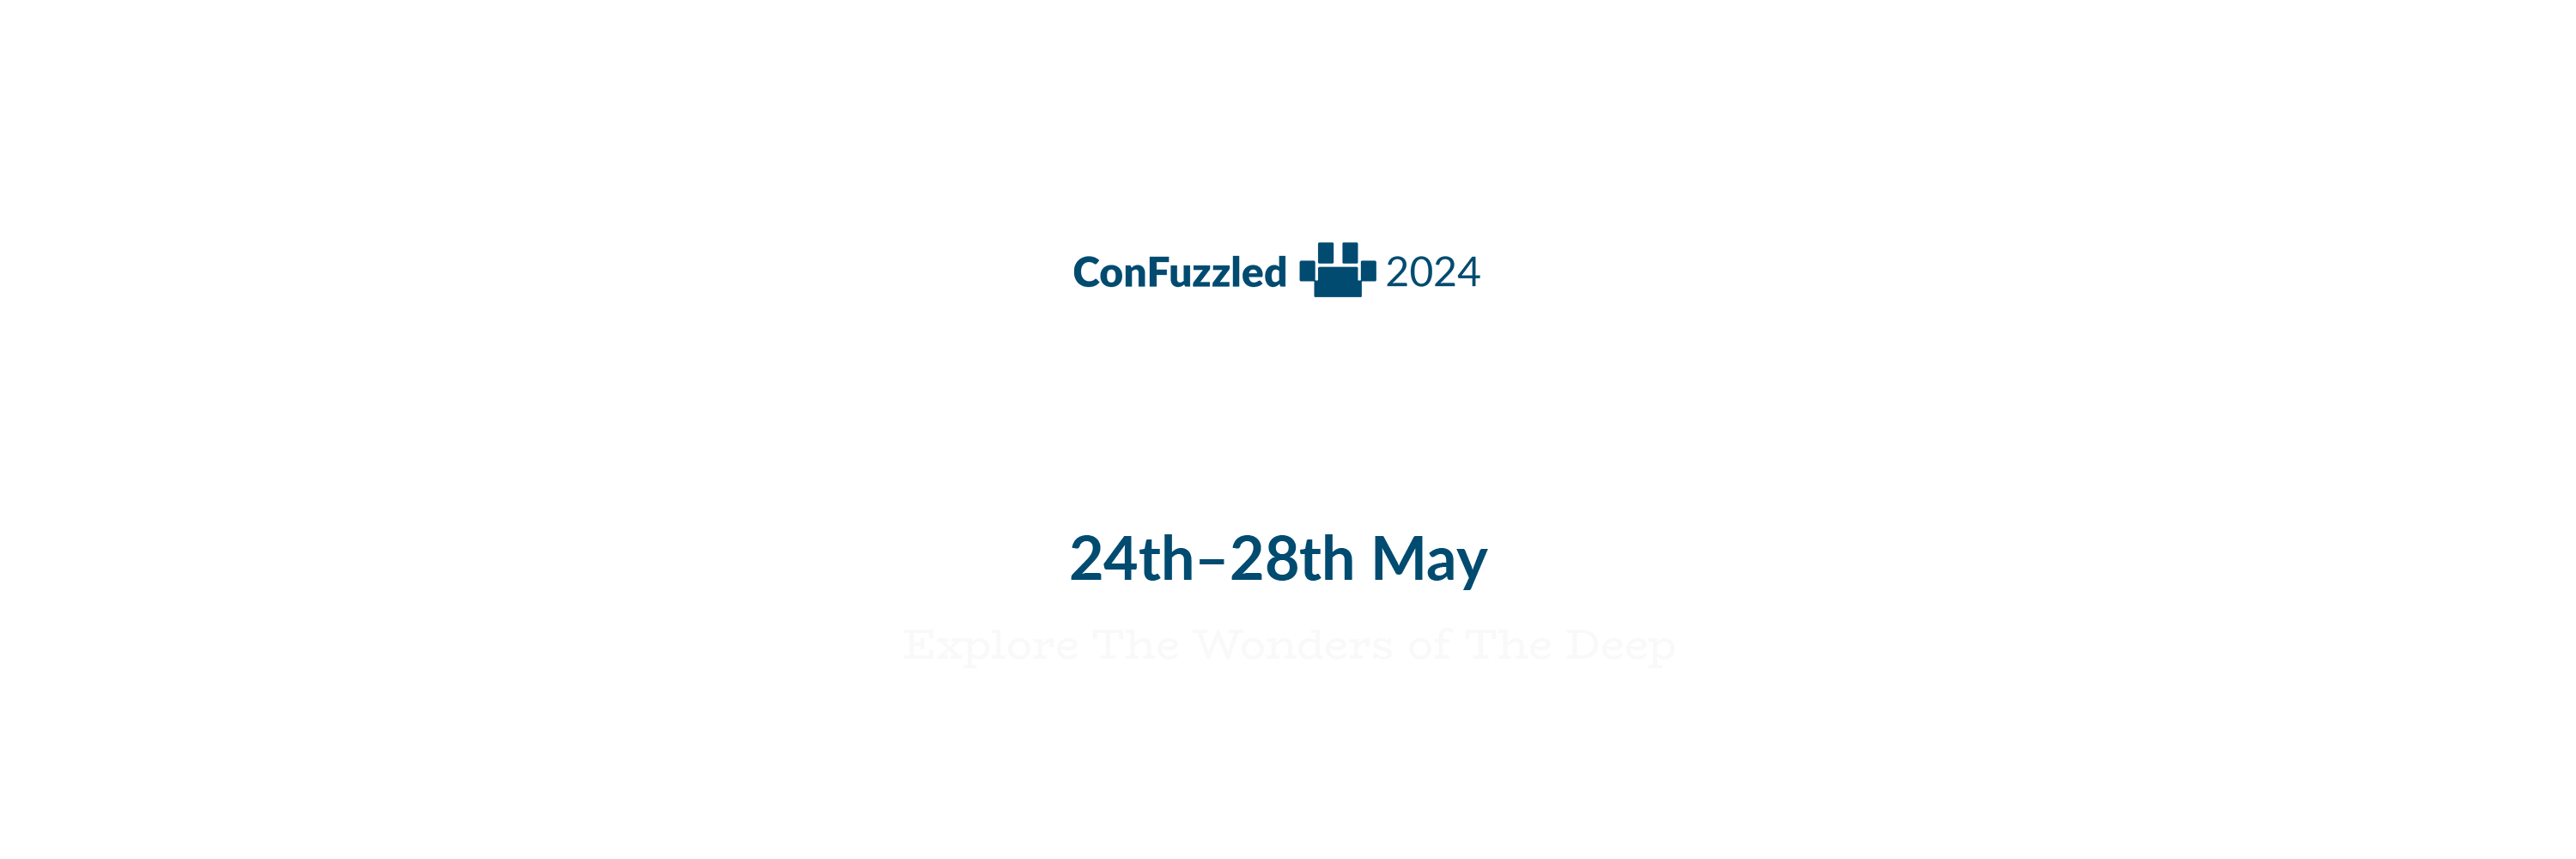 ConFuzzled 2024 Dylan's Ocean Odyssey 24th-28th May Explore The Wonders of The Deep